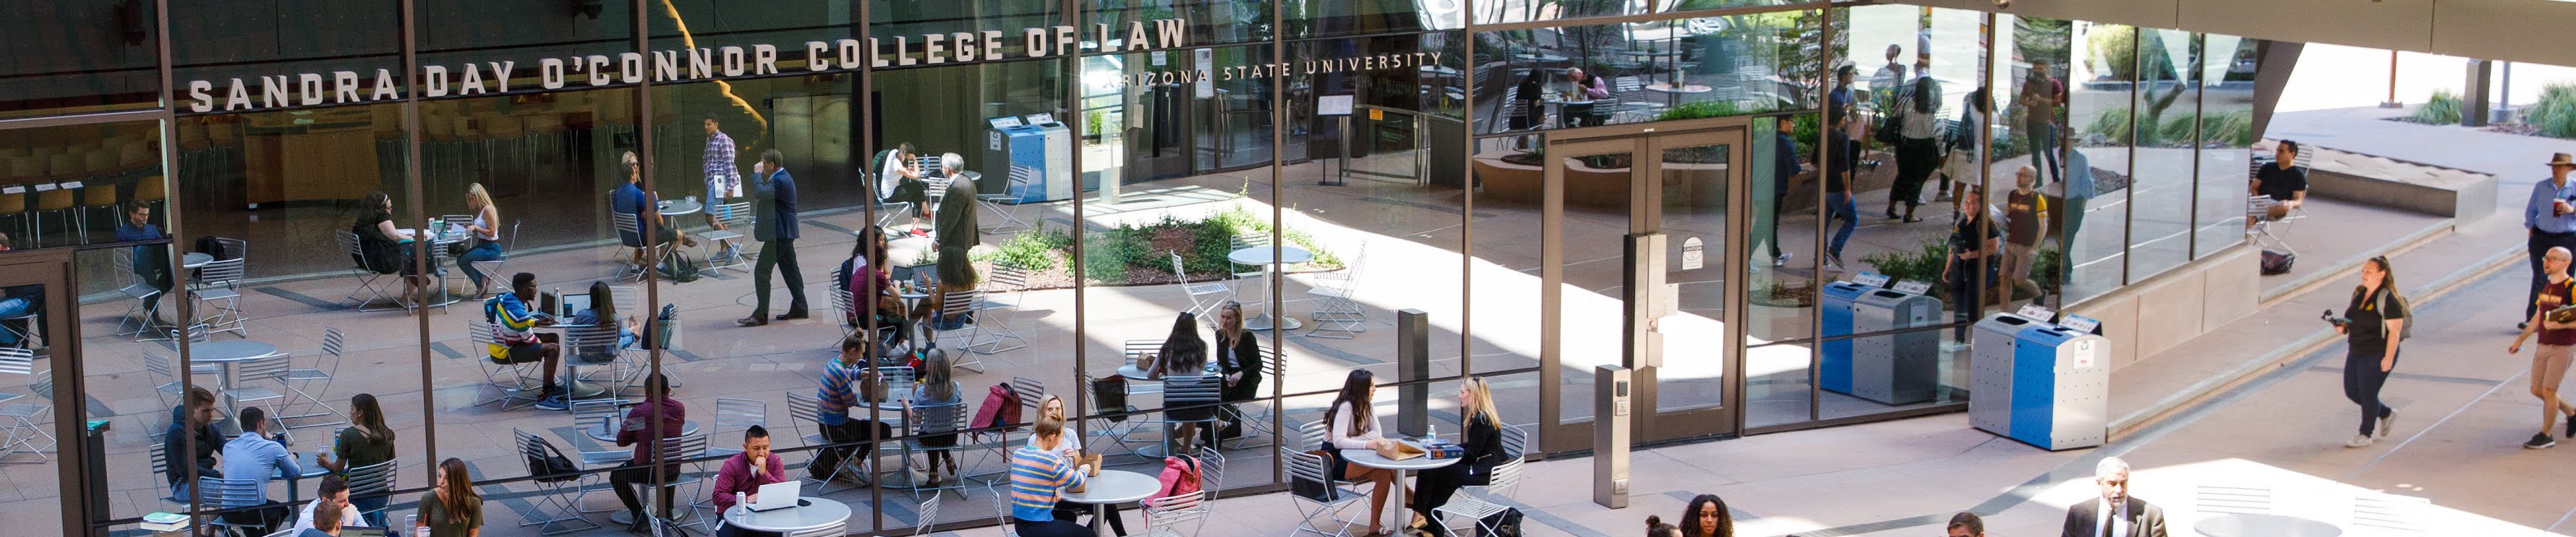 Sandra Day O'Connor College of Law - Beus Center for Law and Society Snell & Wilmer Plaza